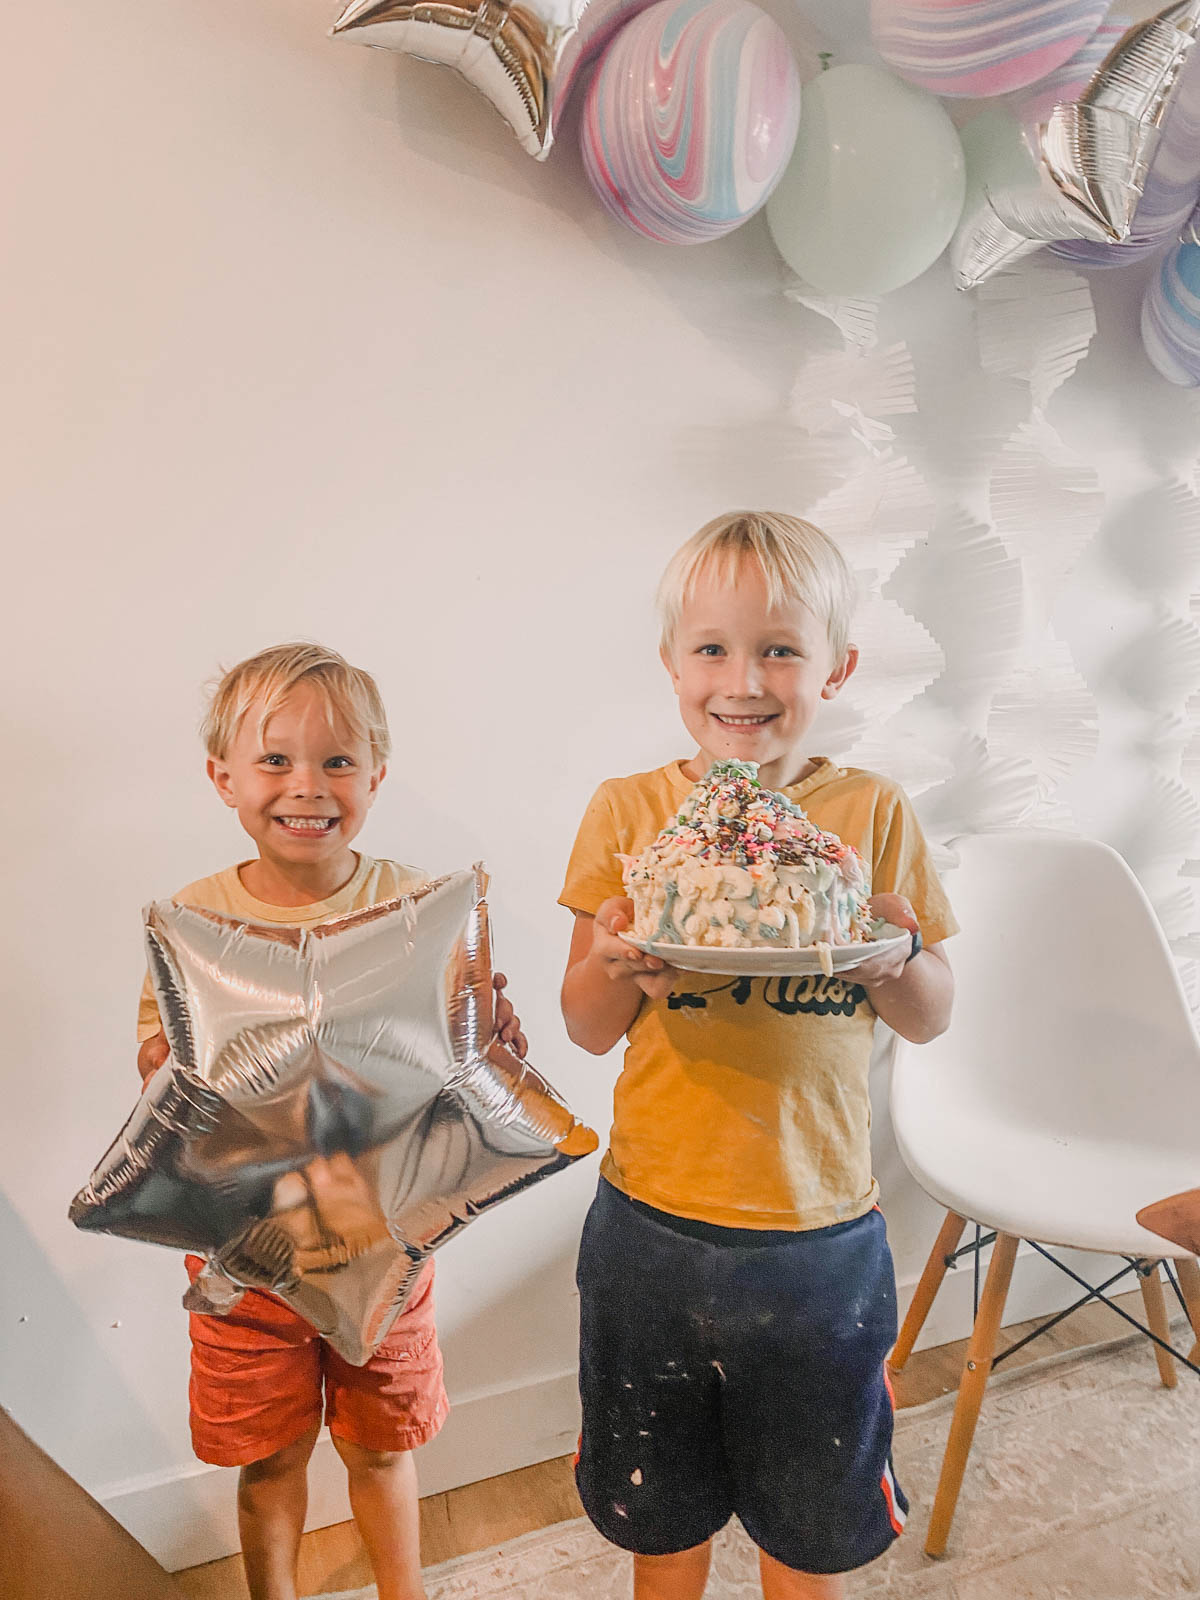 Boys holding cake they decorated, piled high with icing at a cake decorating party